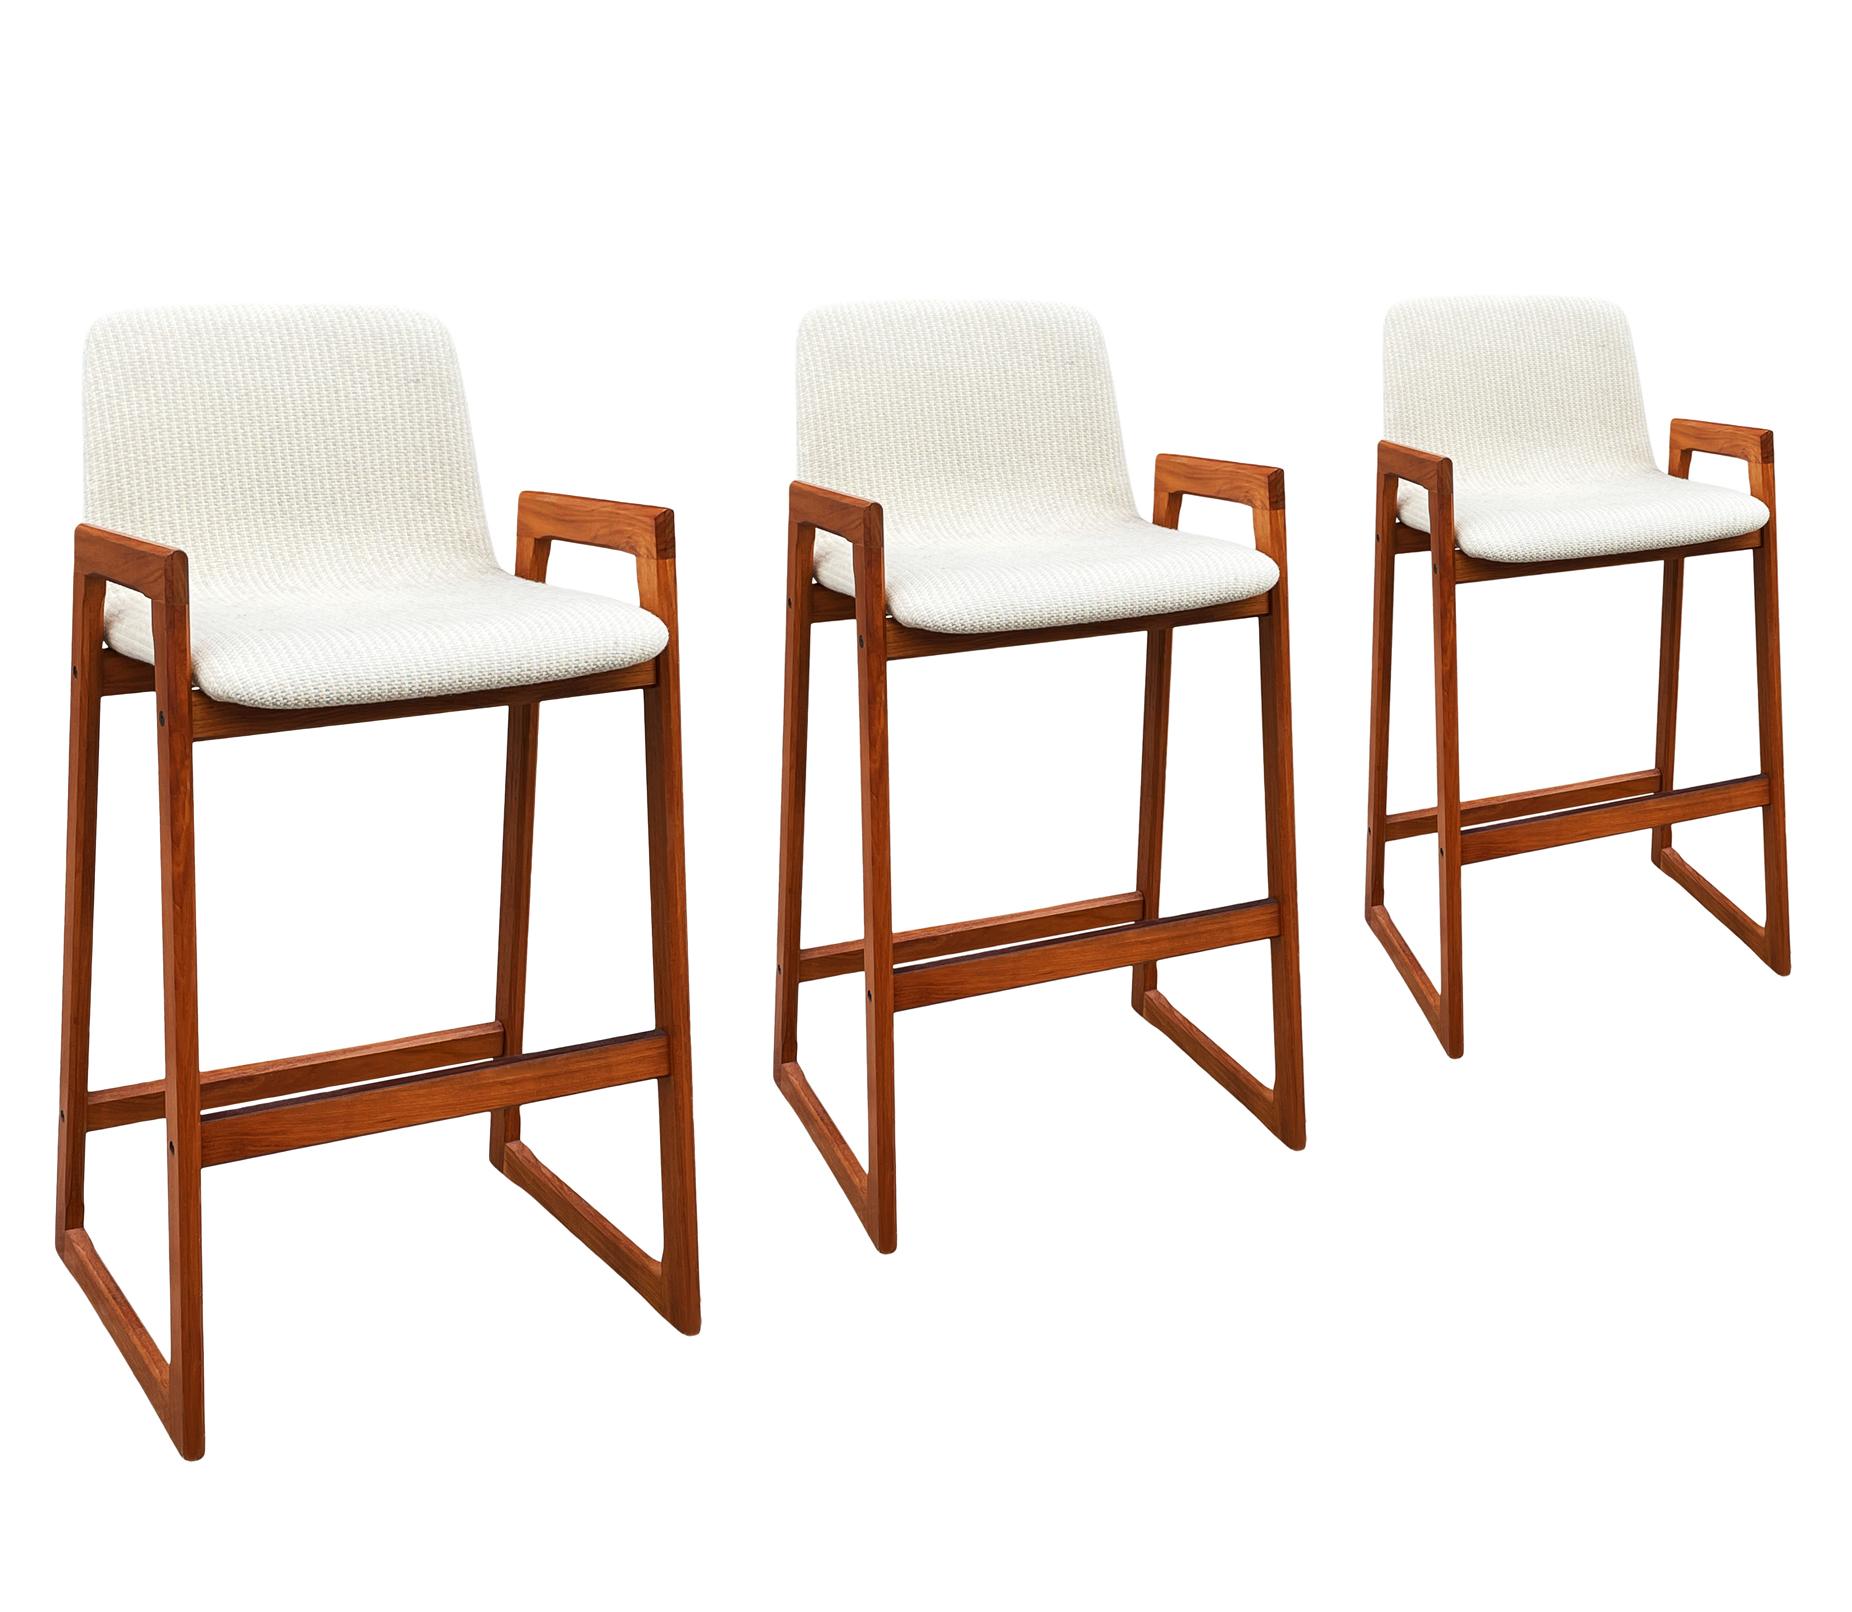 Set of 3 Midcentury Danish Modern Teak Bar Stools with Fabric Seats In Good Condition For Sale In Philadelphia, PA